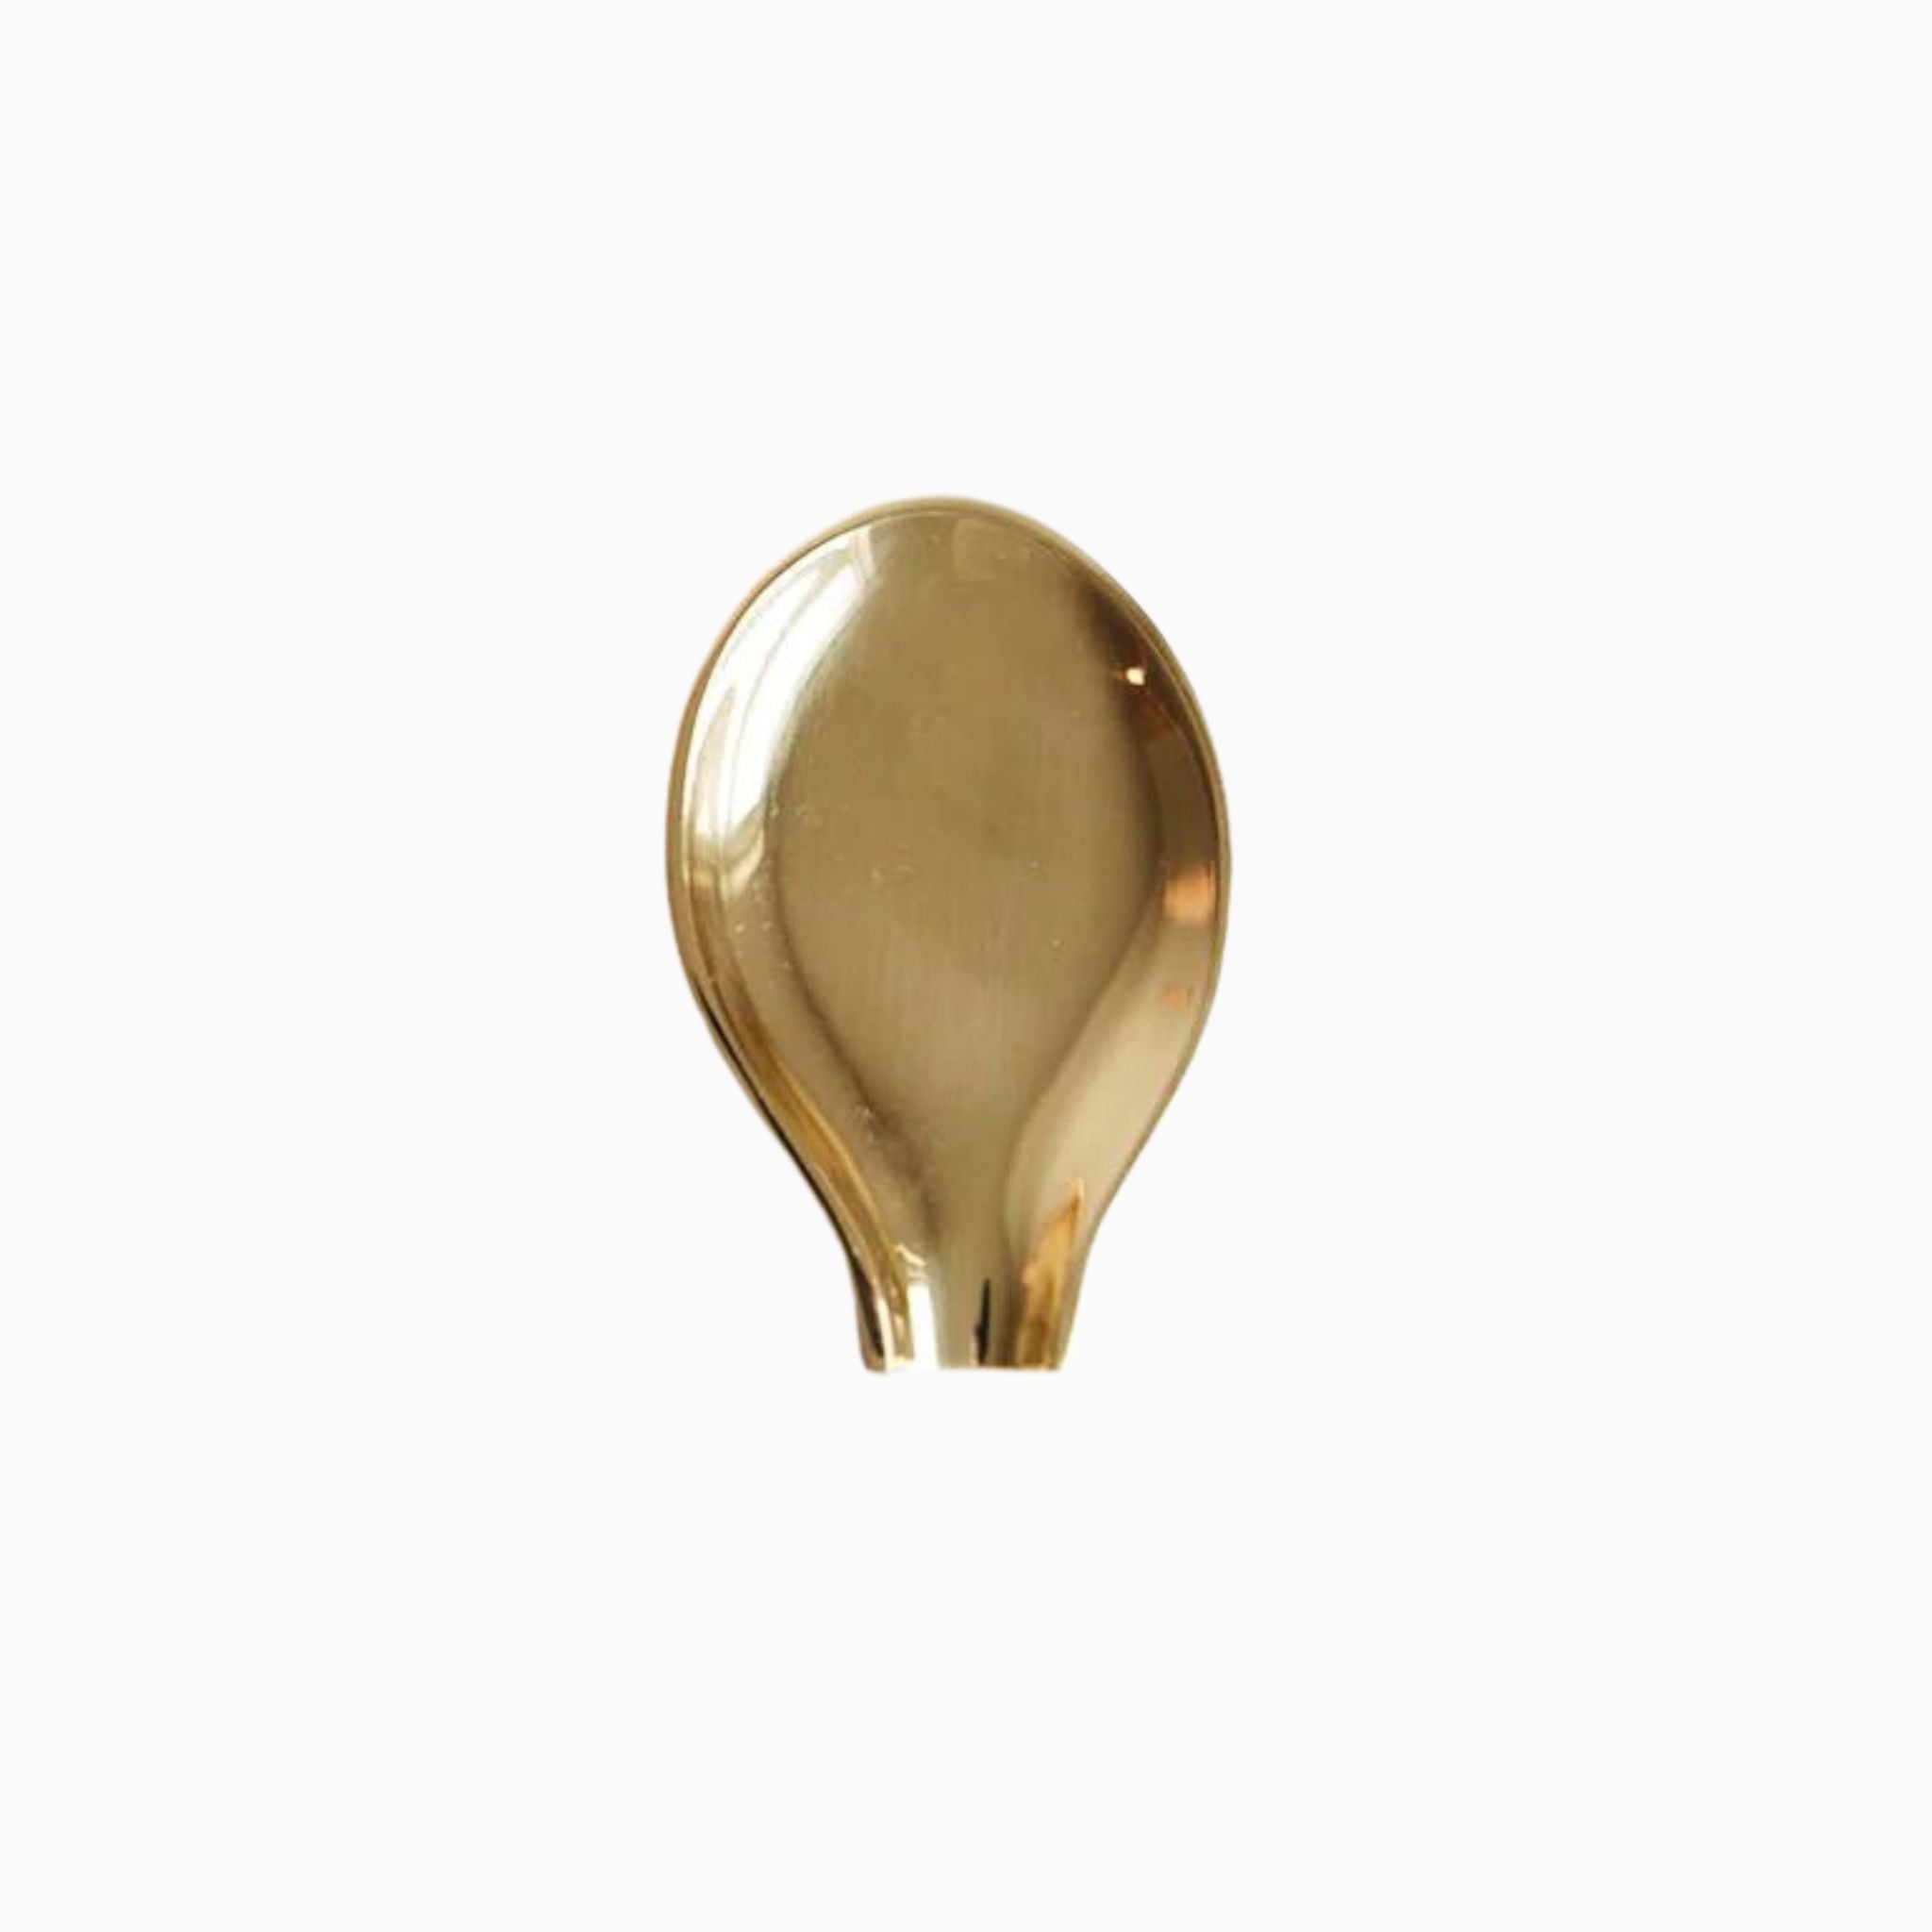 Simply Elevated - Ingenuous yet super simple, this Brass Spoon Rest provides a place to put your spoon when not in use. Perfect for keeping on the counter while cooking, or giving to guests when Serving tea, the Brass Spoon Rest is the perfect accompaniment for any oft-used stove-side utensil. 